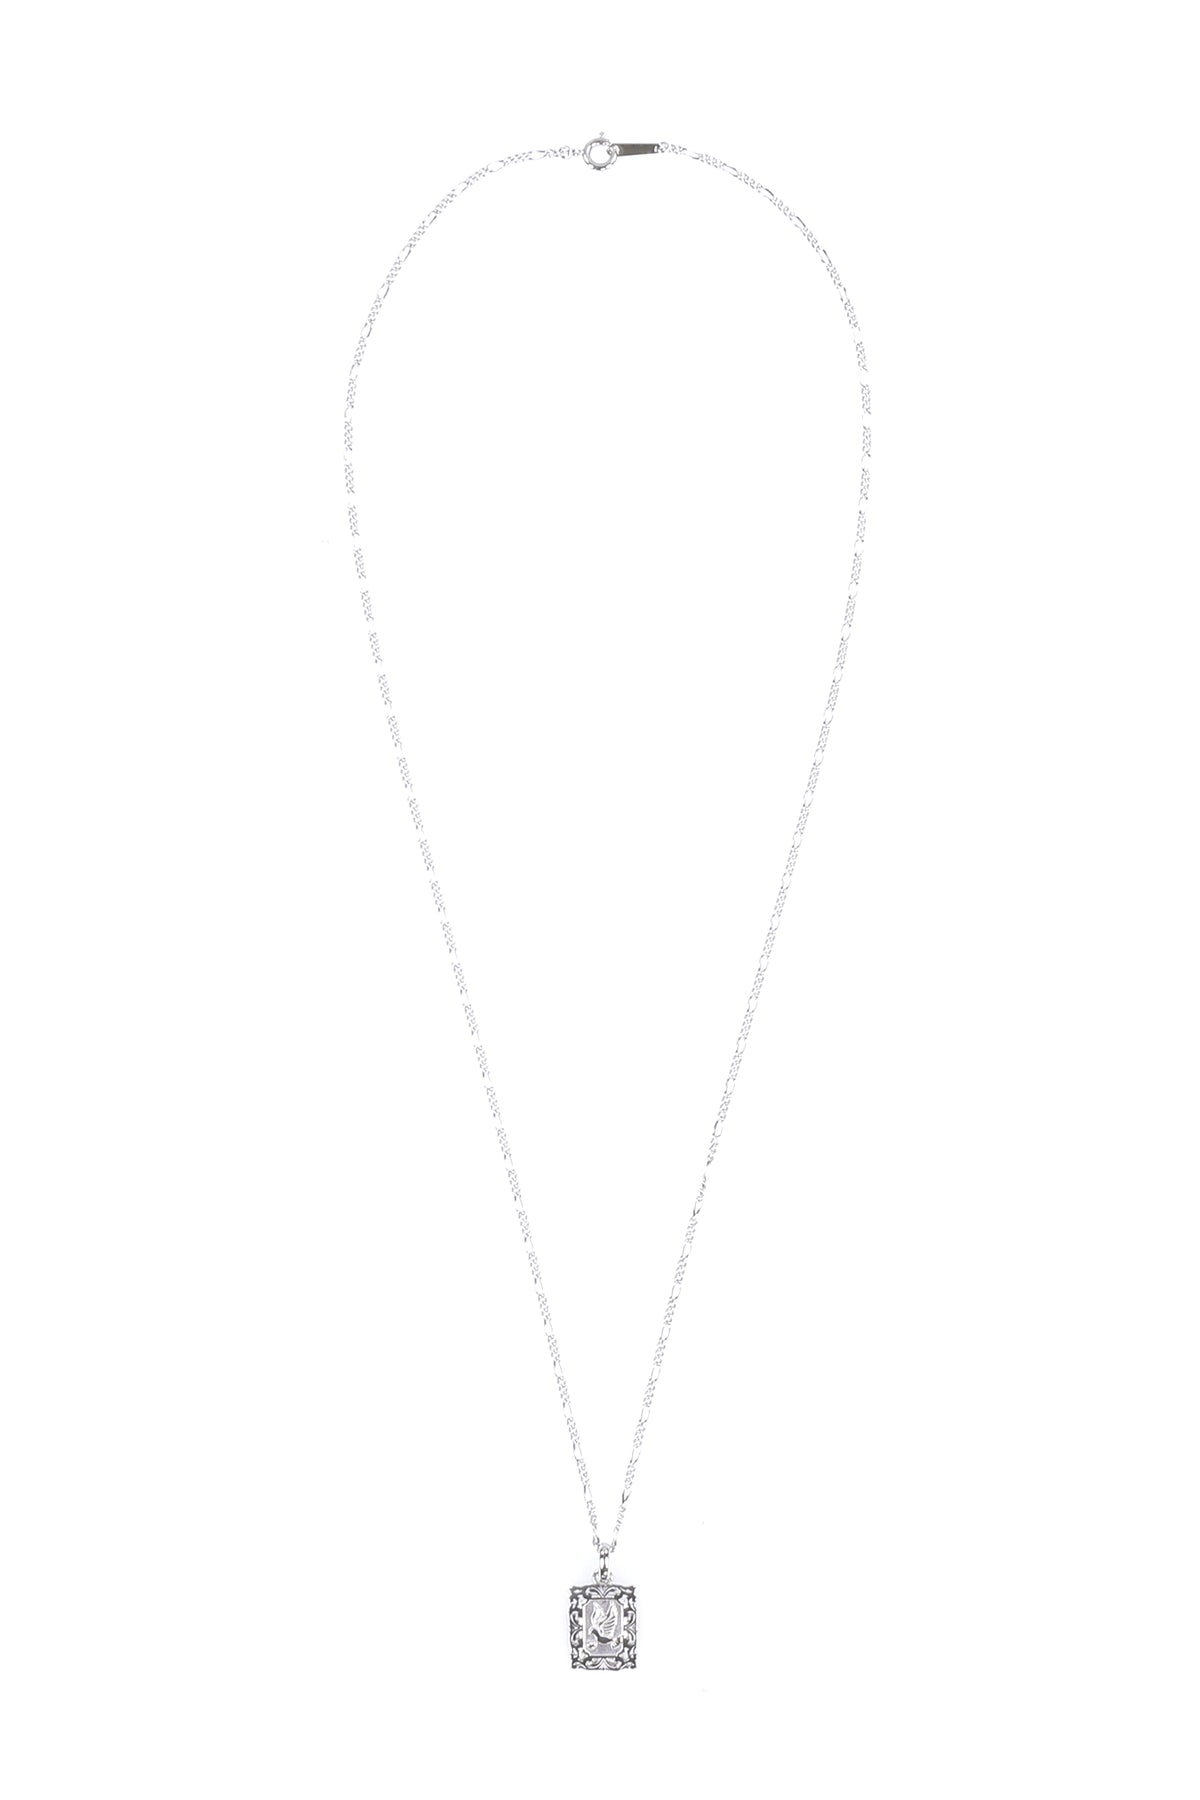 SQUARE PIGEON NECKLESS / SIL